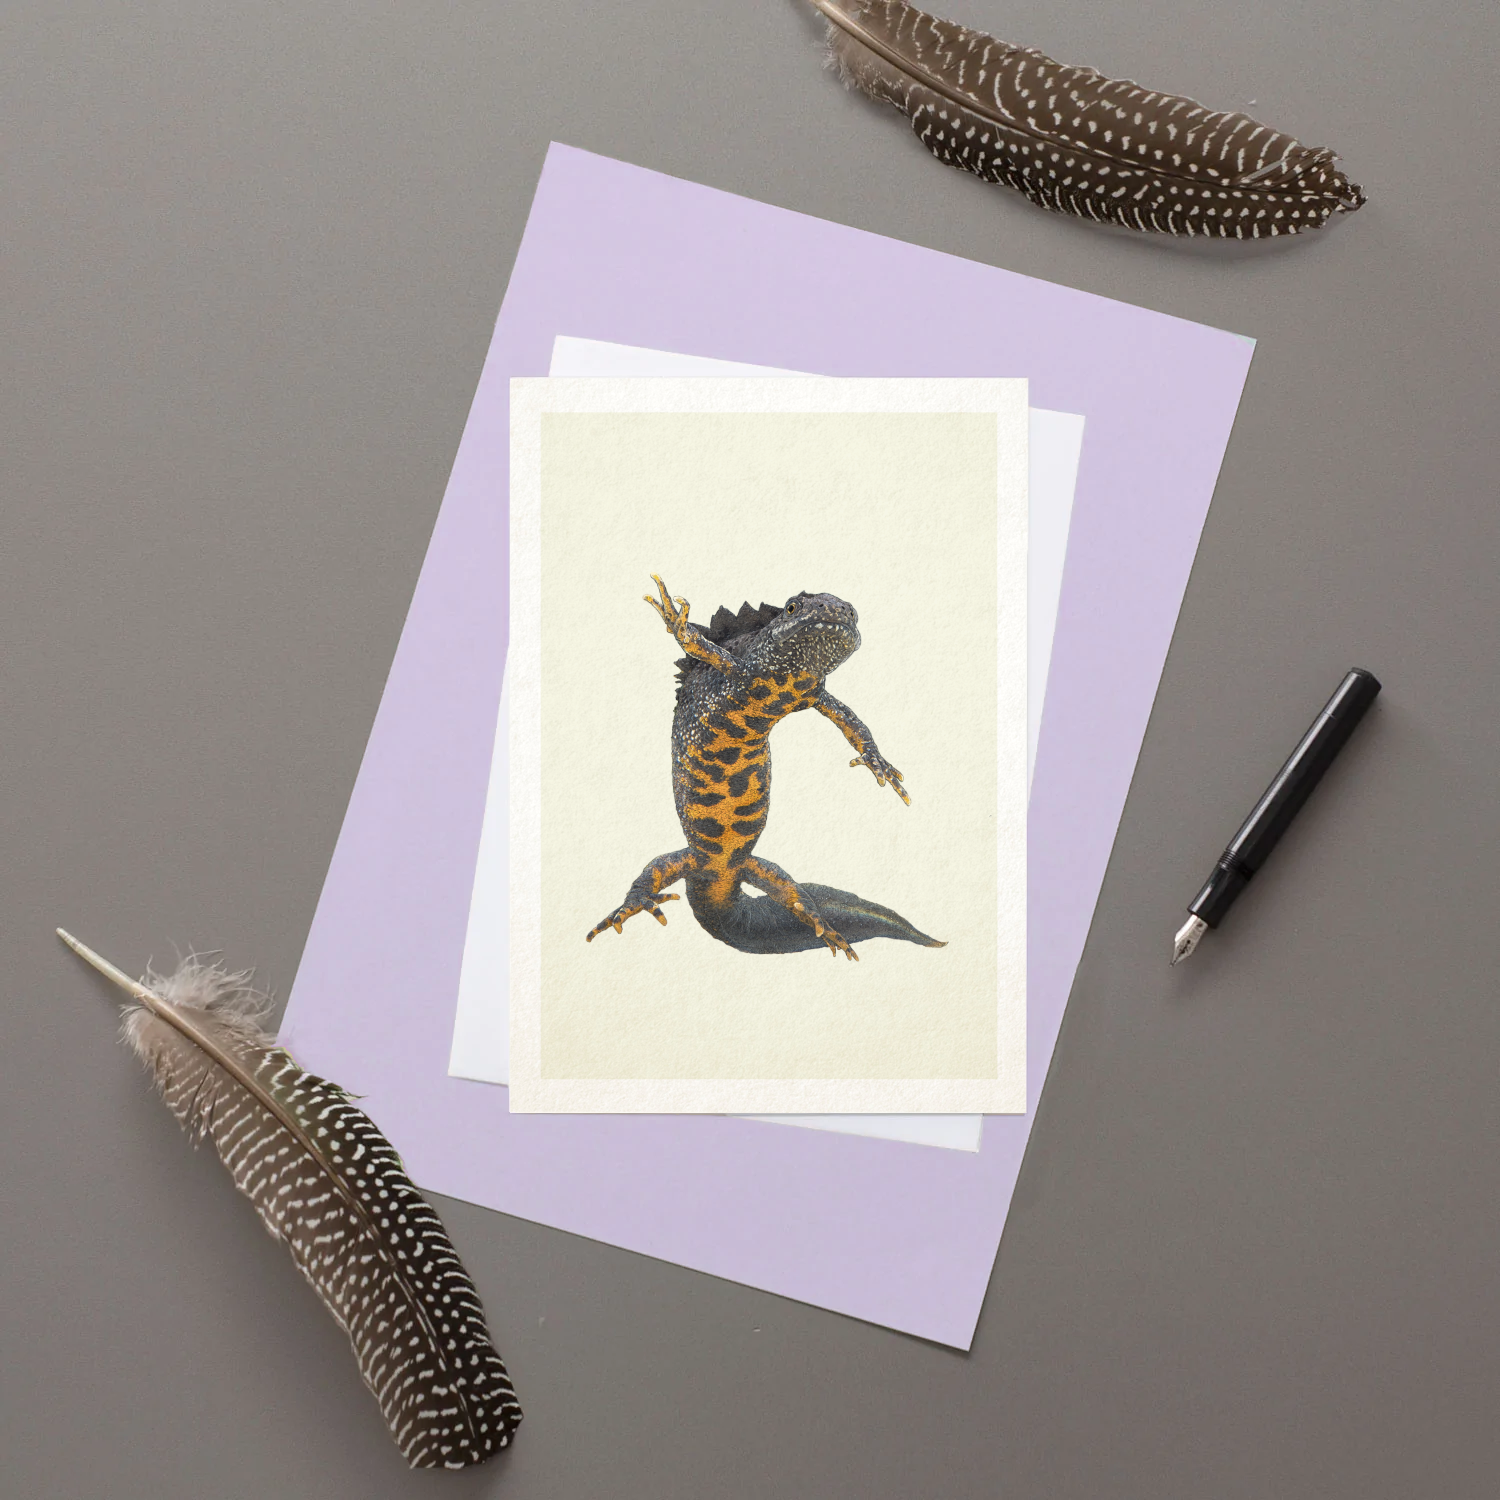 Great Crested Newt - Greeting Card